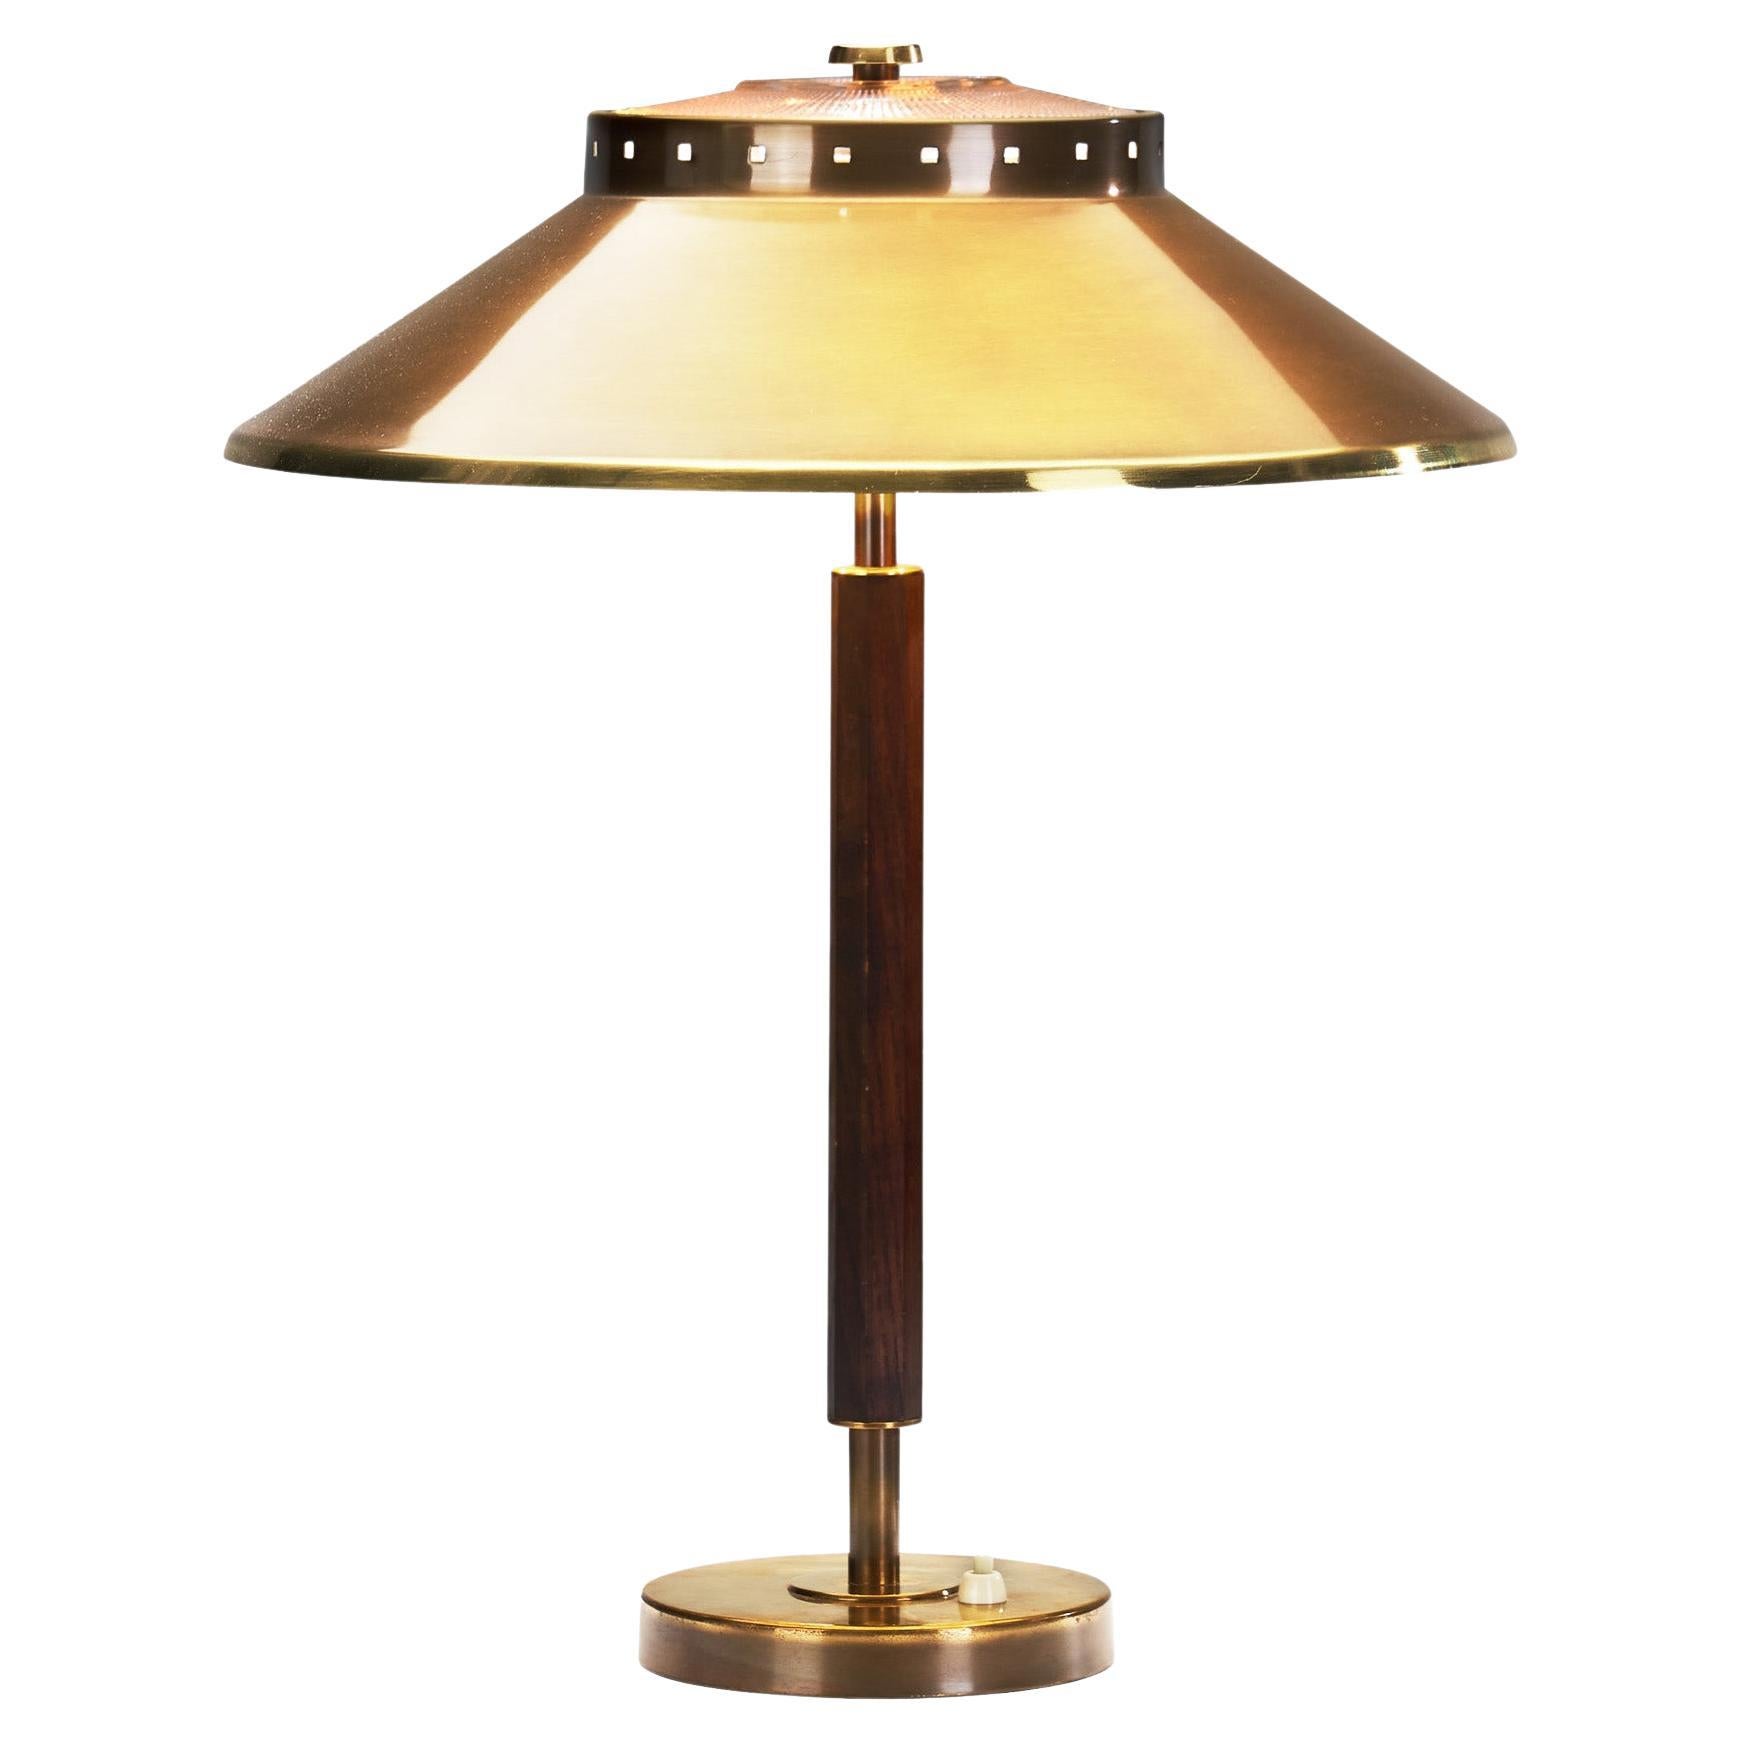 Brass, Oak and Glass Table Lamp by Boréns, Borås, Sweden 1940s For Sale